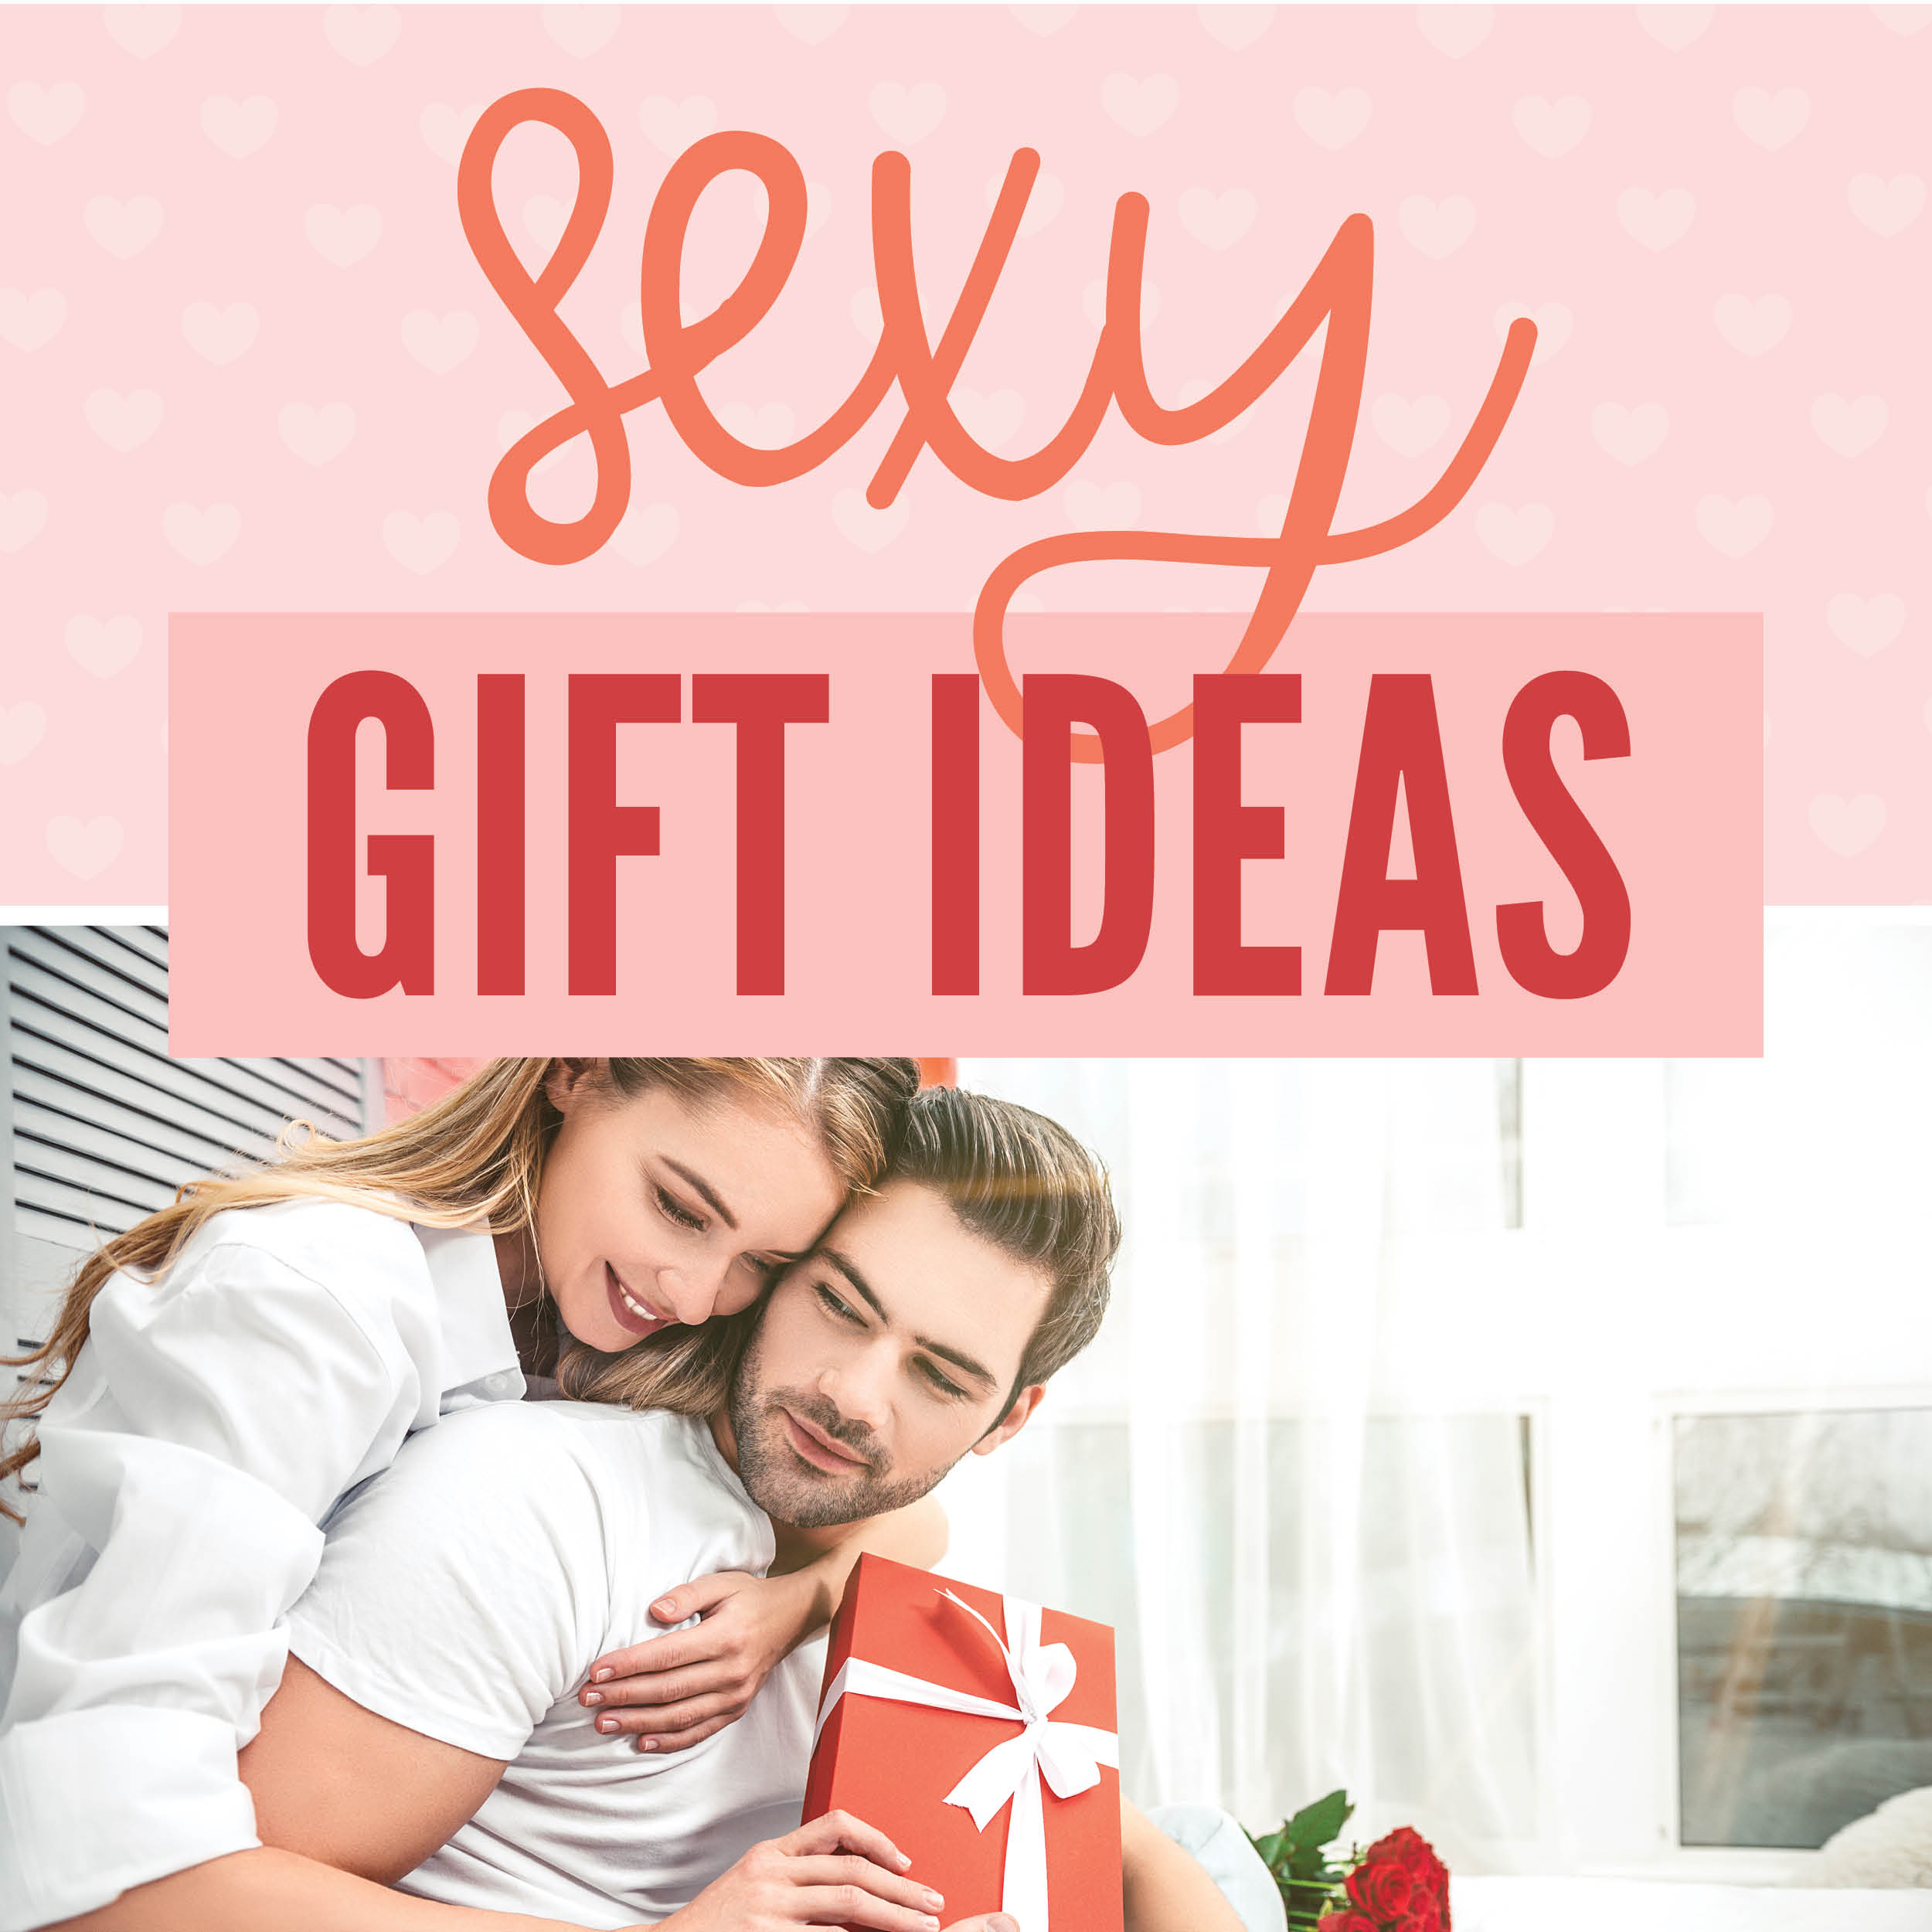 erotic gifts for your wife